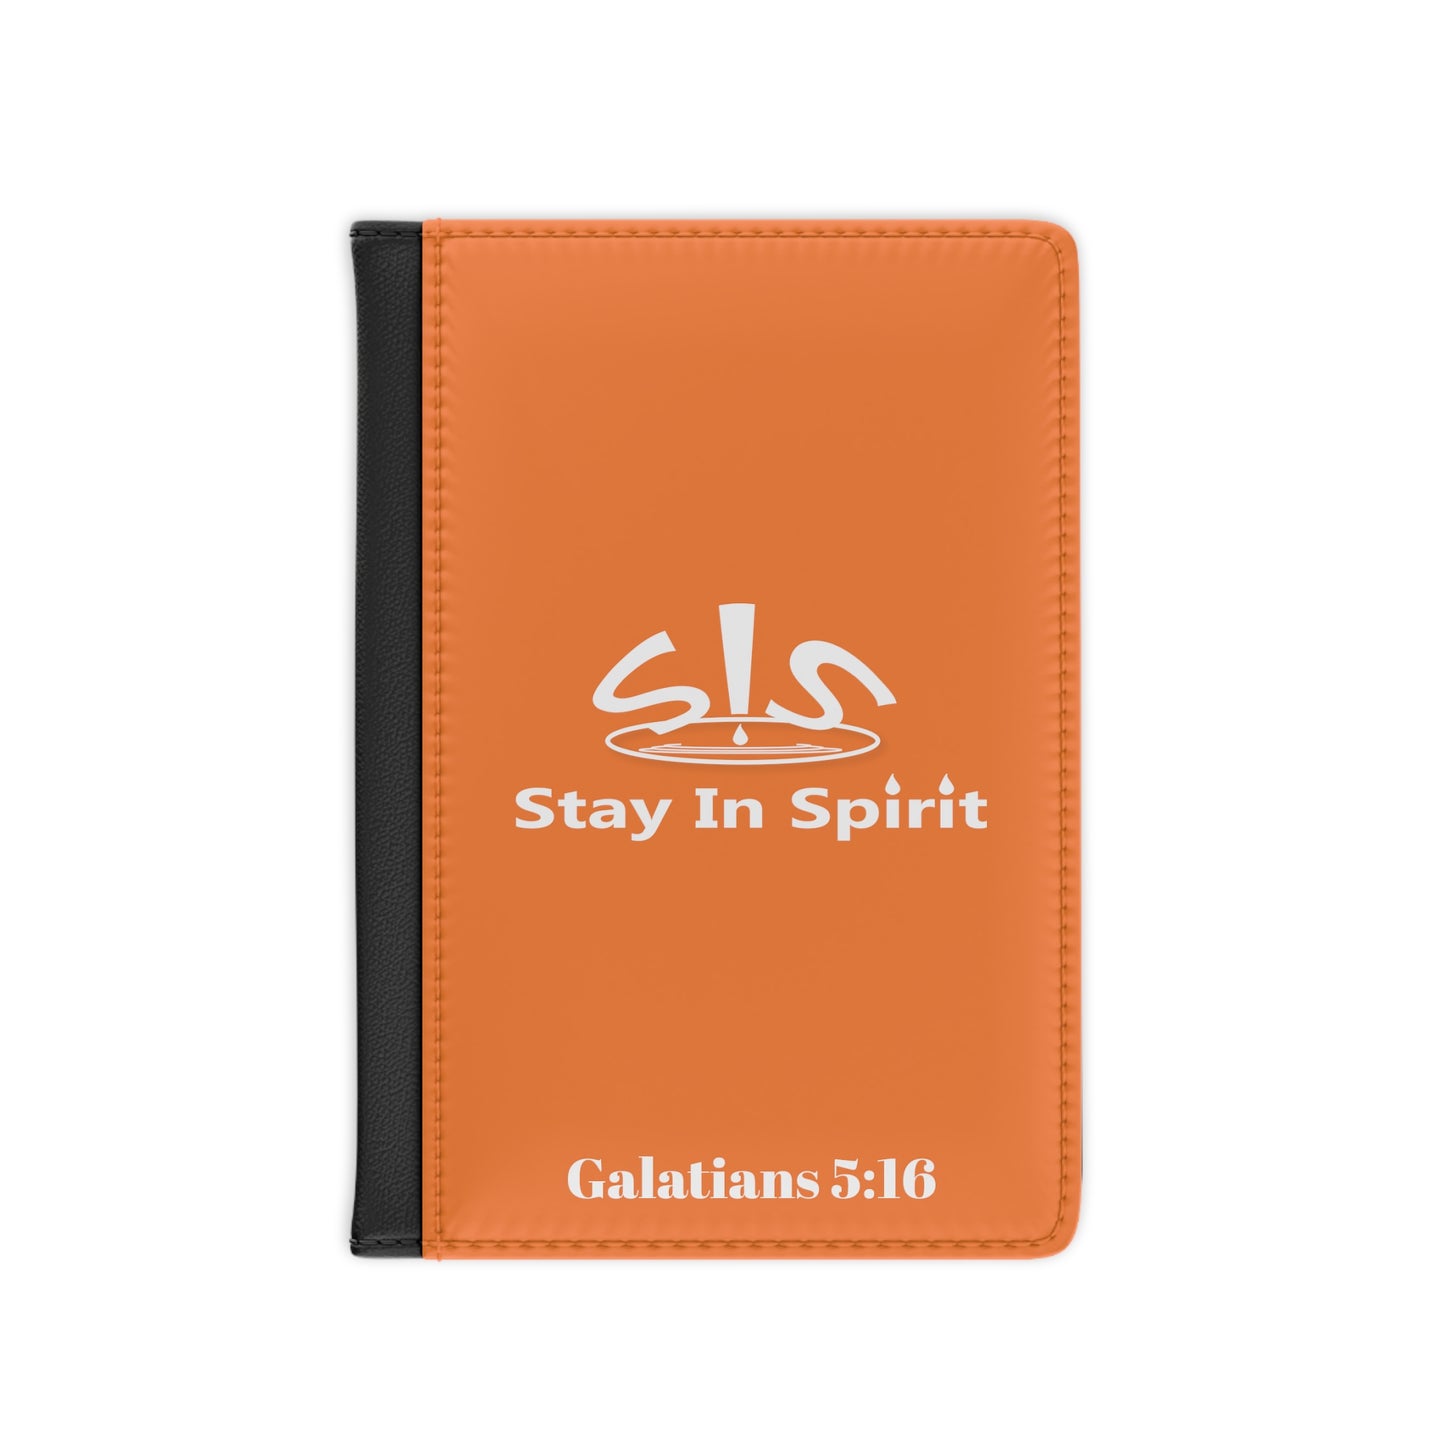 Copy of Hot Pink Stay In Spirit Passport Cover